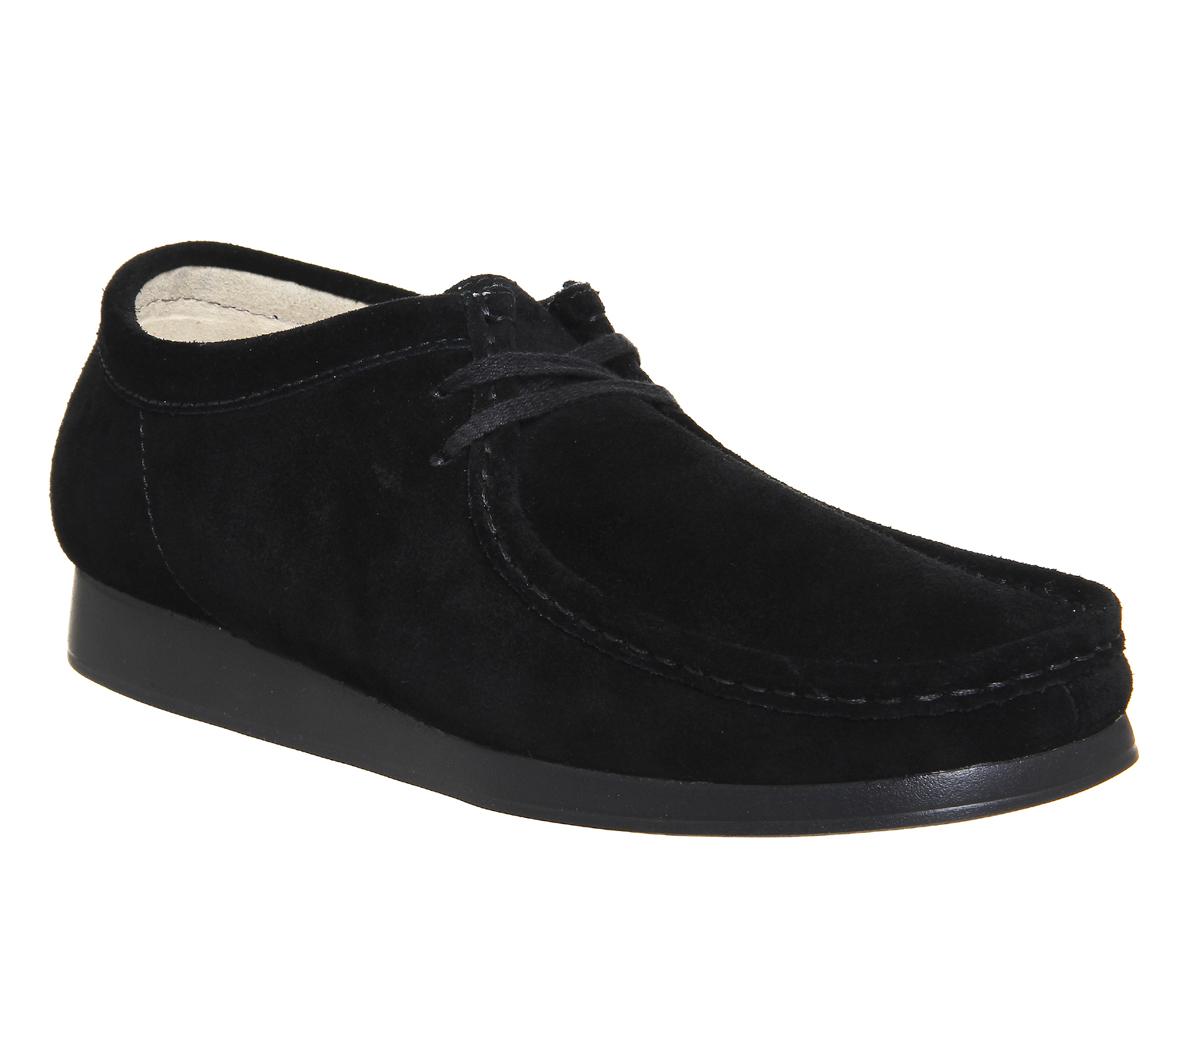 Clarks Wallabee Aerial Shoes in Black for Men - Lyst